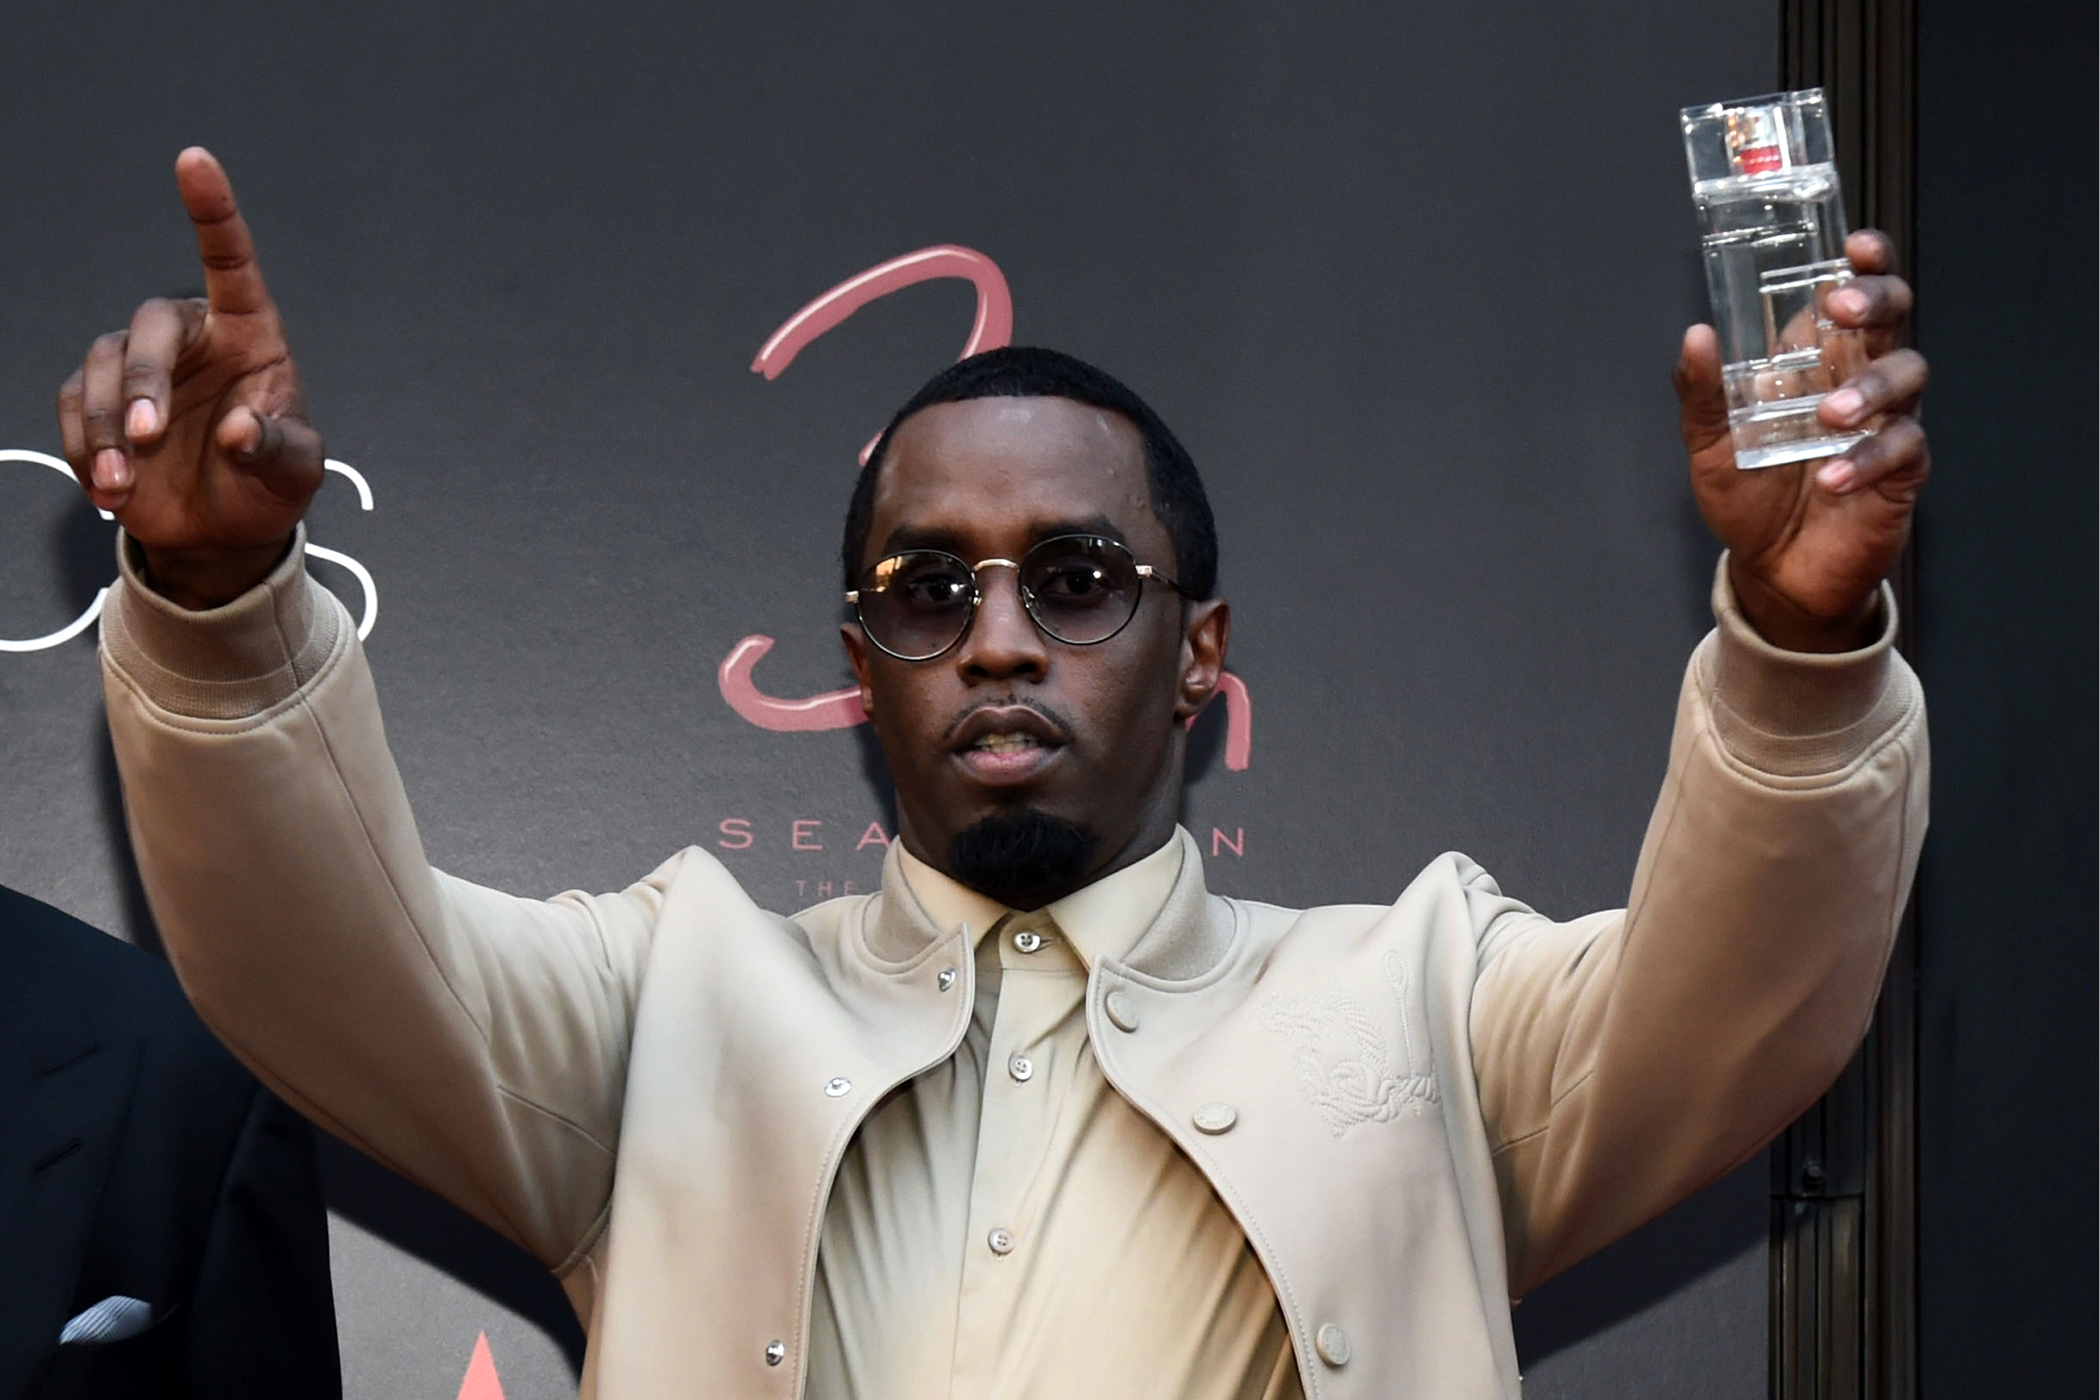 Sean 'Diddy' Combs attends the Sean  Diddy  Combs Fragrance Launch at Macy's Herald Square on May 6, 2015 in New York City.